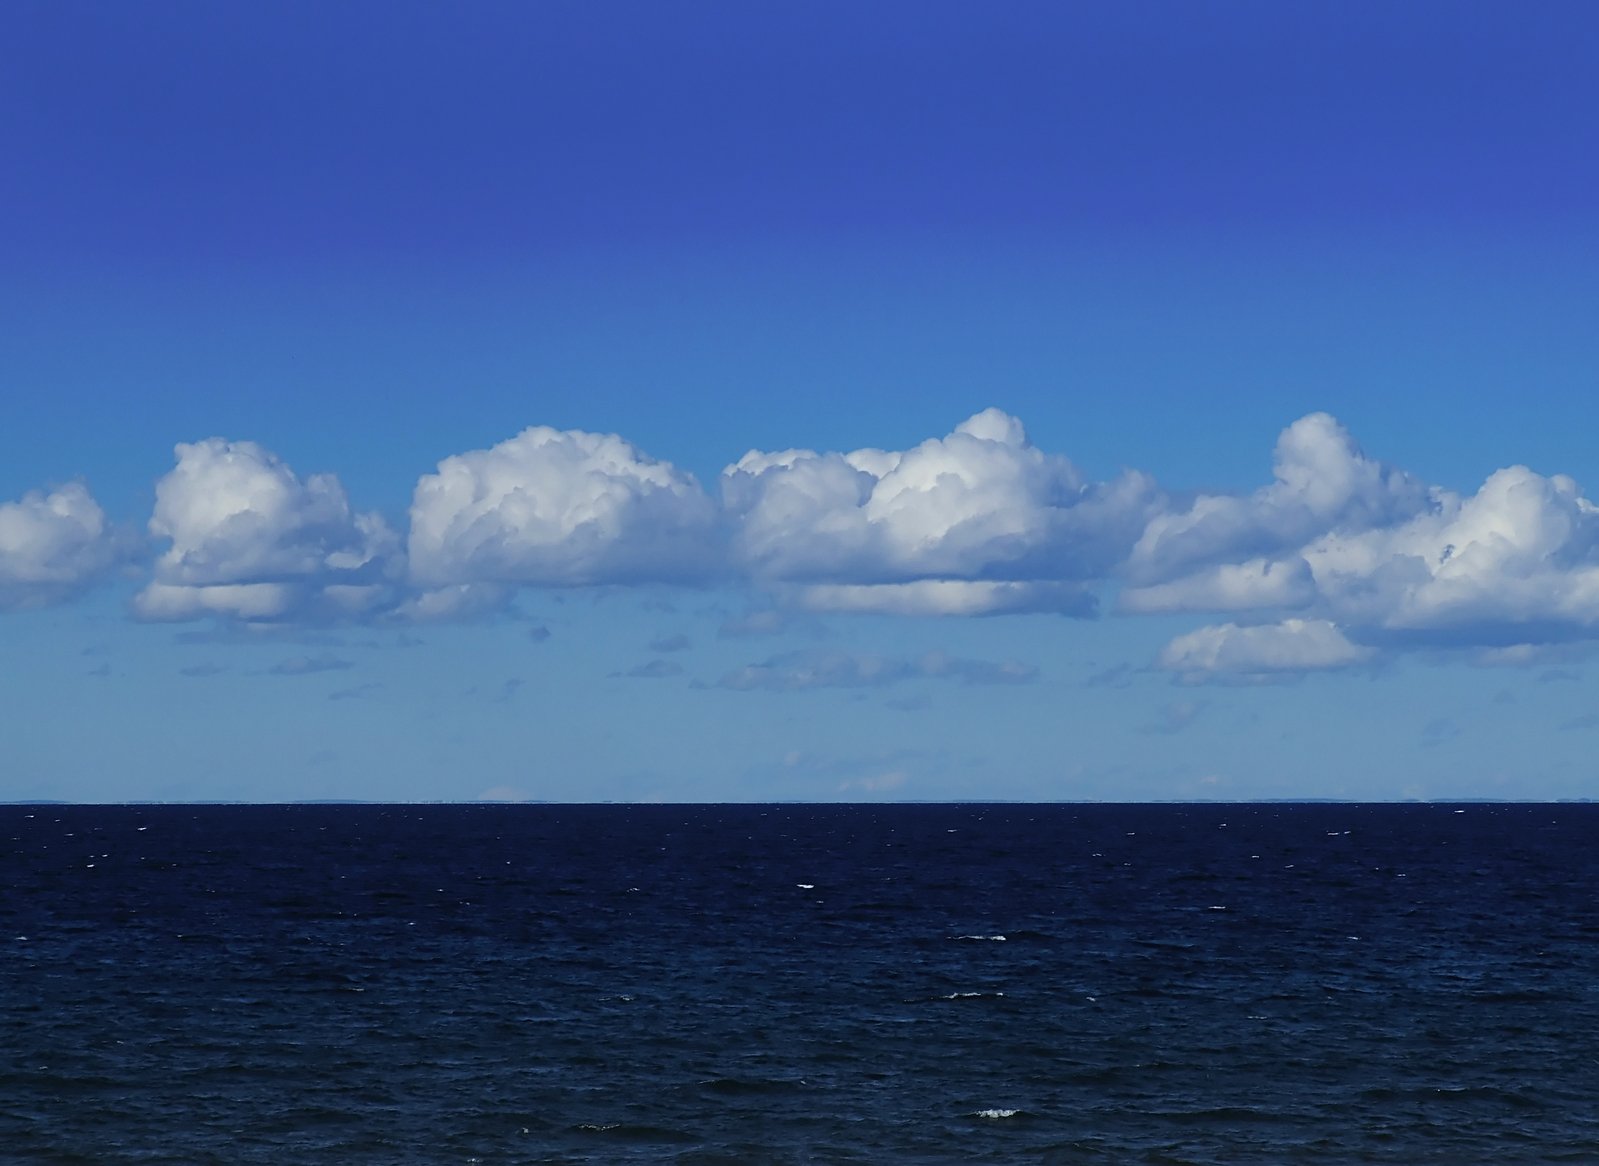 several white clouds float in the blue ocean